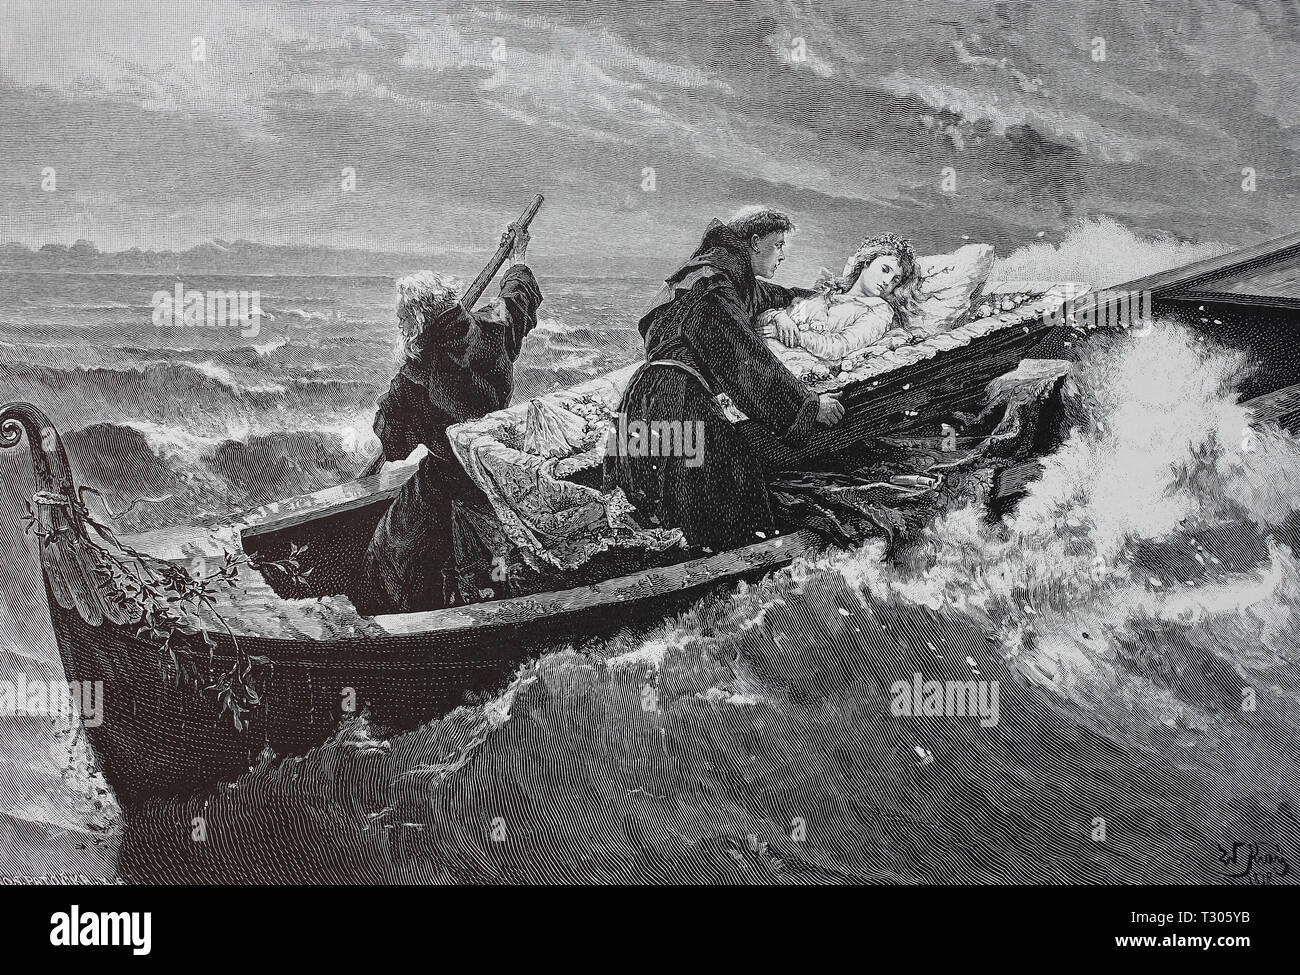 Digital improved reproduction, Monks bring the corpse of a young woman by the boat over the stormy sea to the cloister cemetery, Mönche bringen den Leichnam einer jungen Frau mit dem Boot über die stürmische See zum Klosterfriedhof, from an original print from the 19th century Stock Photo